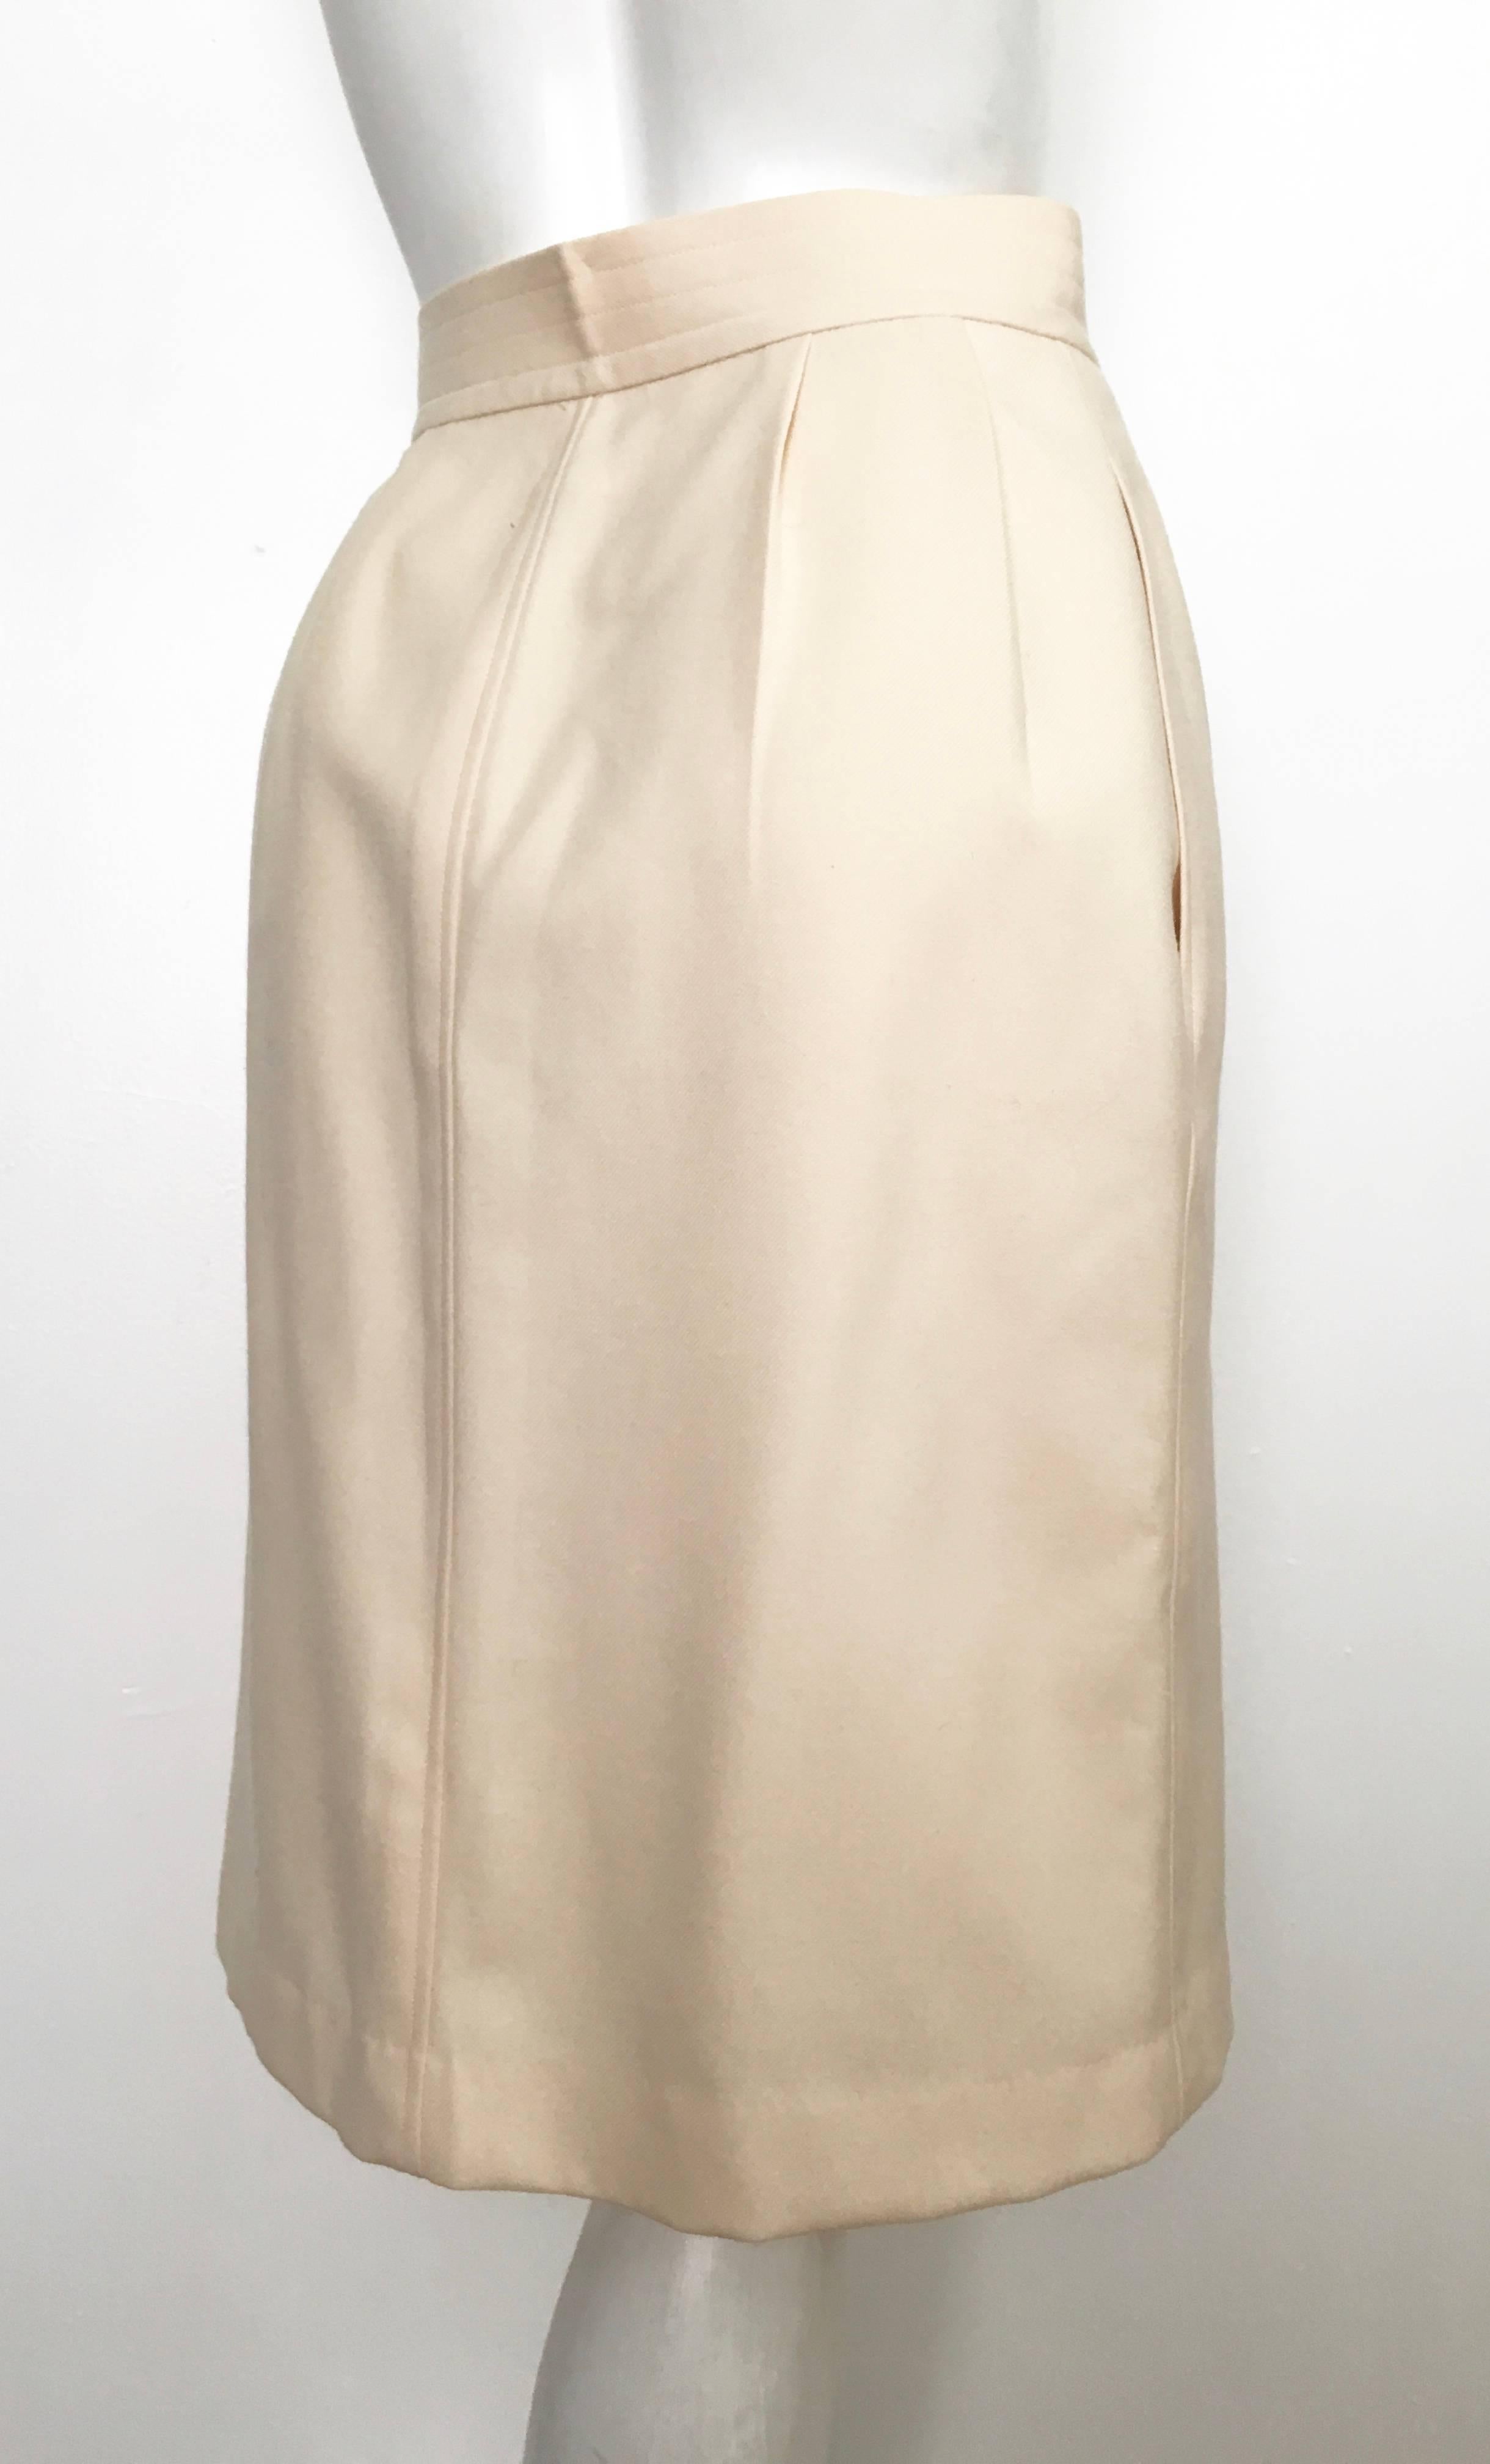 Saint Laurent Rive Gauche Wool Cream Pencil Skirt with Pockets, 1980s  In Excellent Condition For Sale In Atlanta, GA